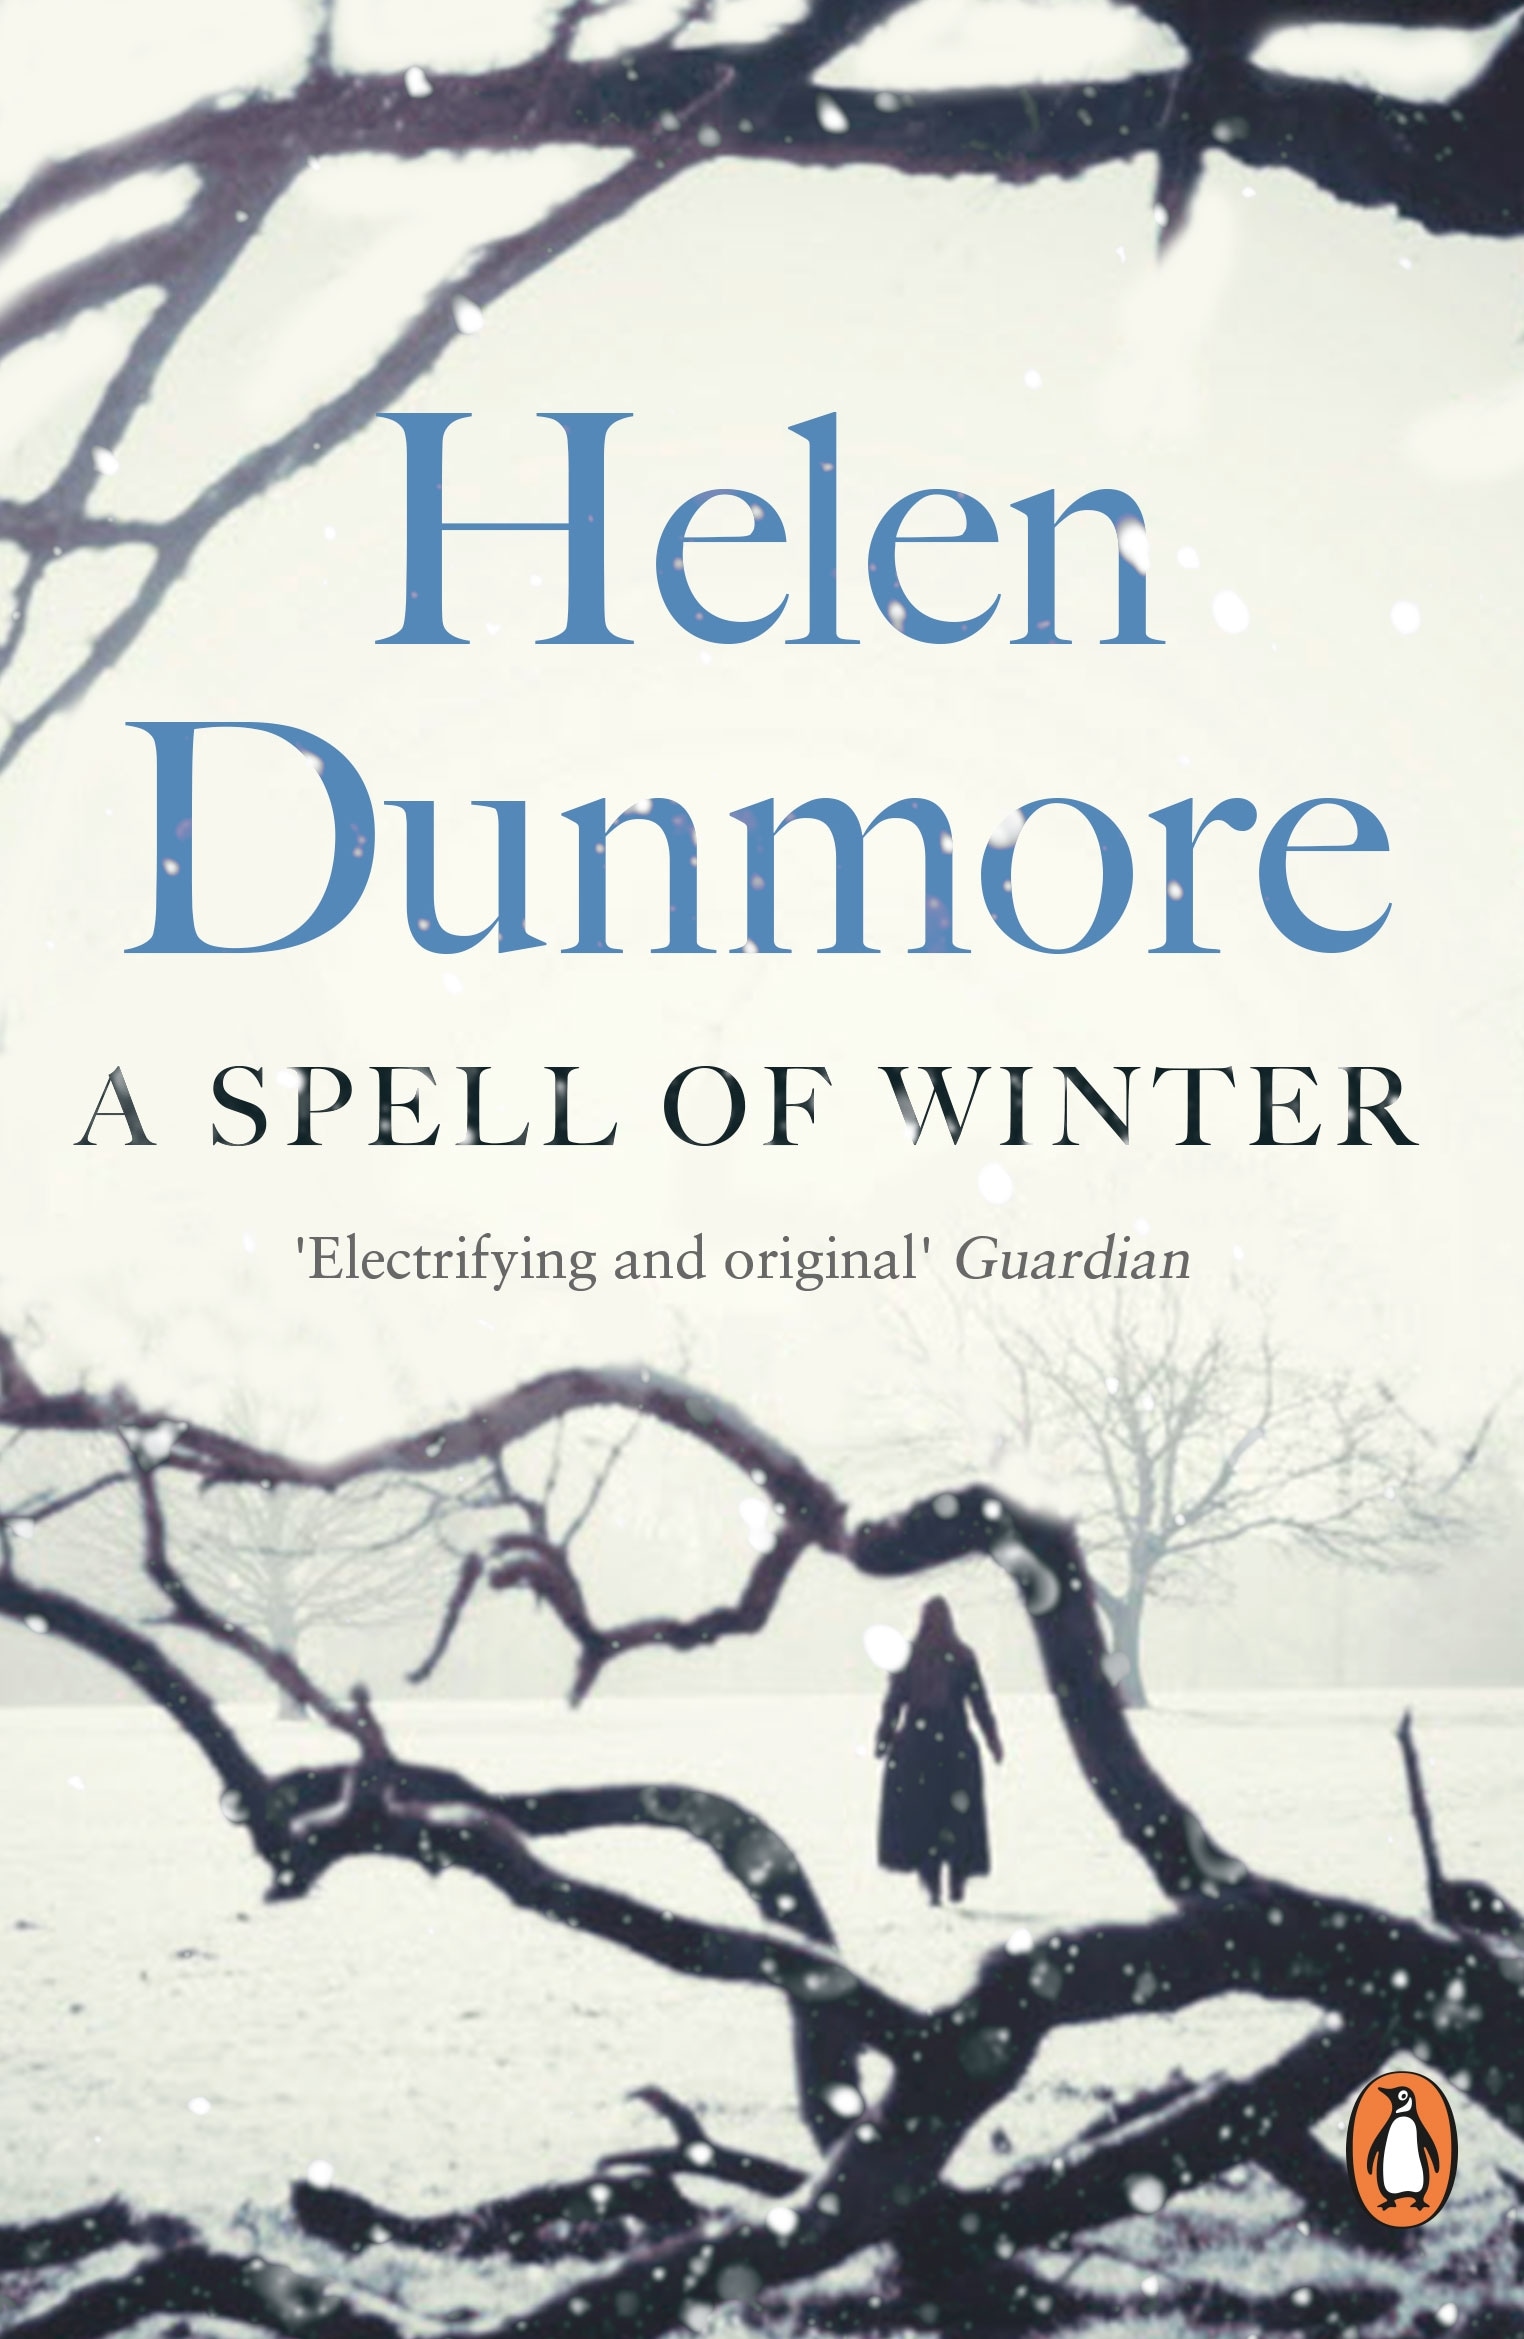 Book “A Spell of Winter” by Helen Dunmore — October 17, 2019